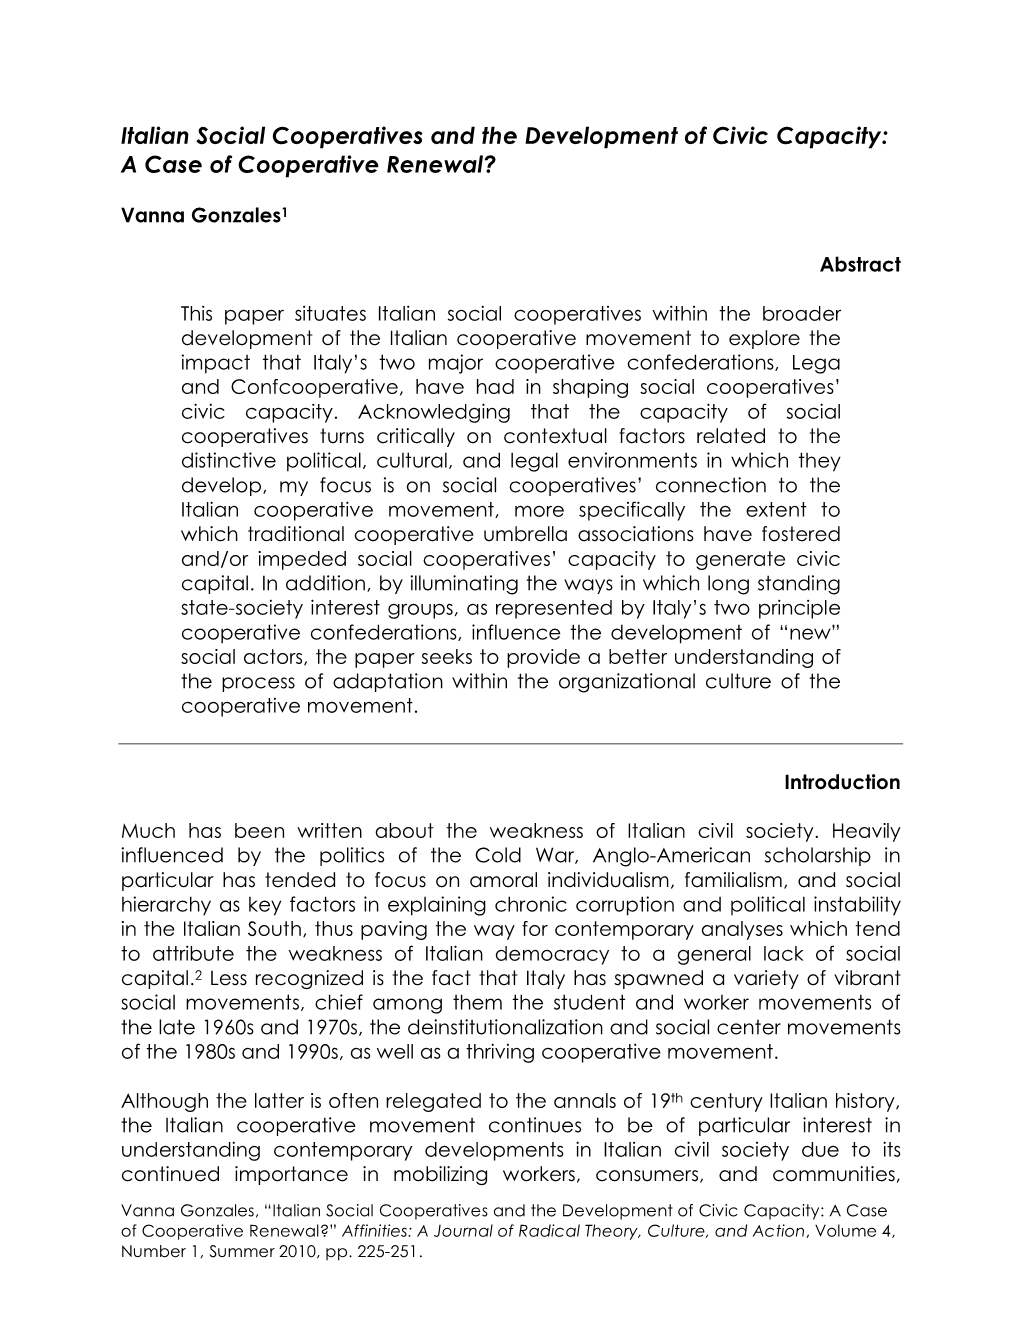 Italian Social Cooperatives and the Development of Civic Capacity: a Case of Cooperative Renewal?